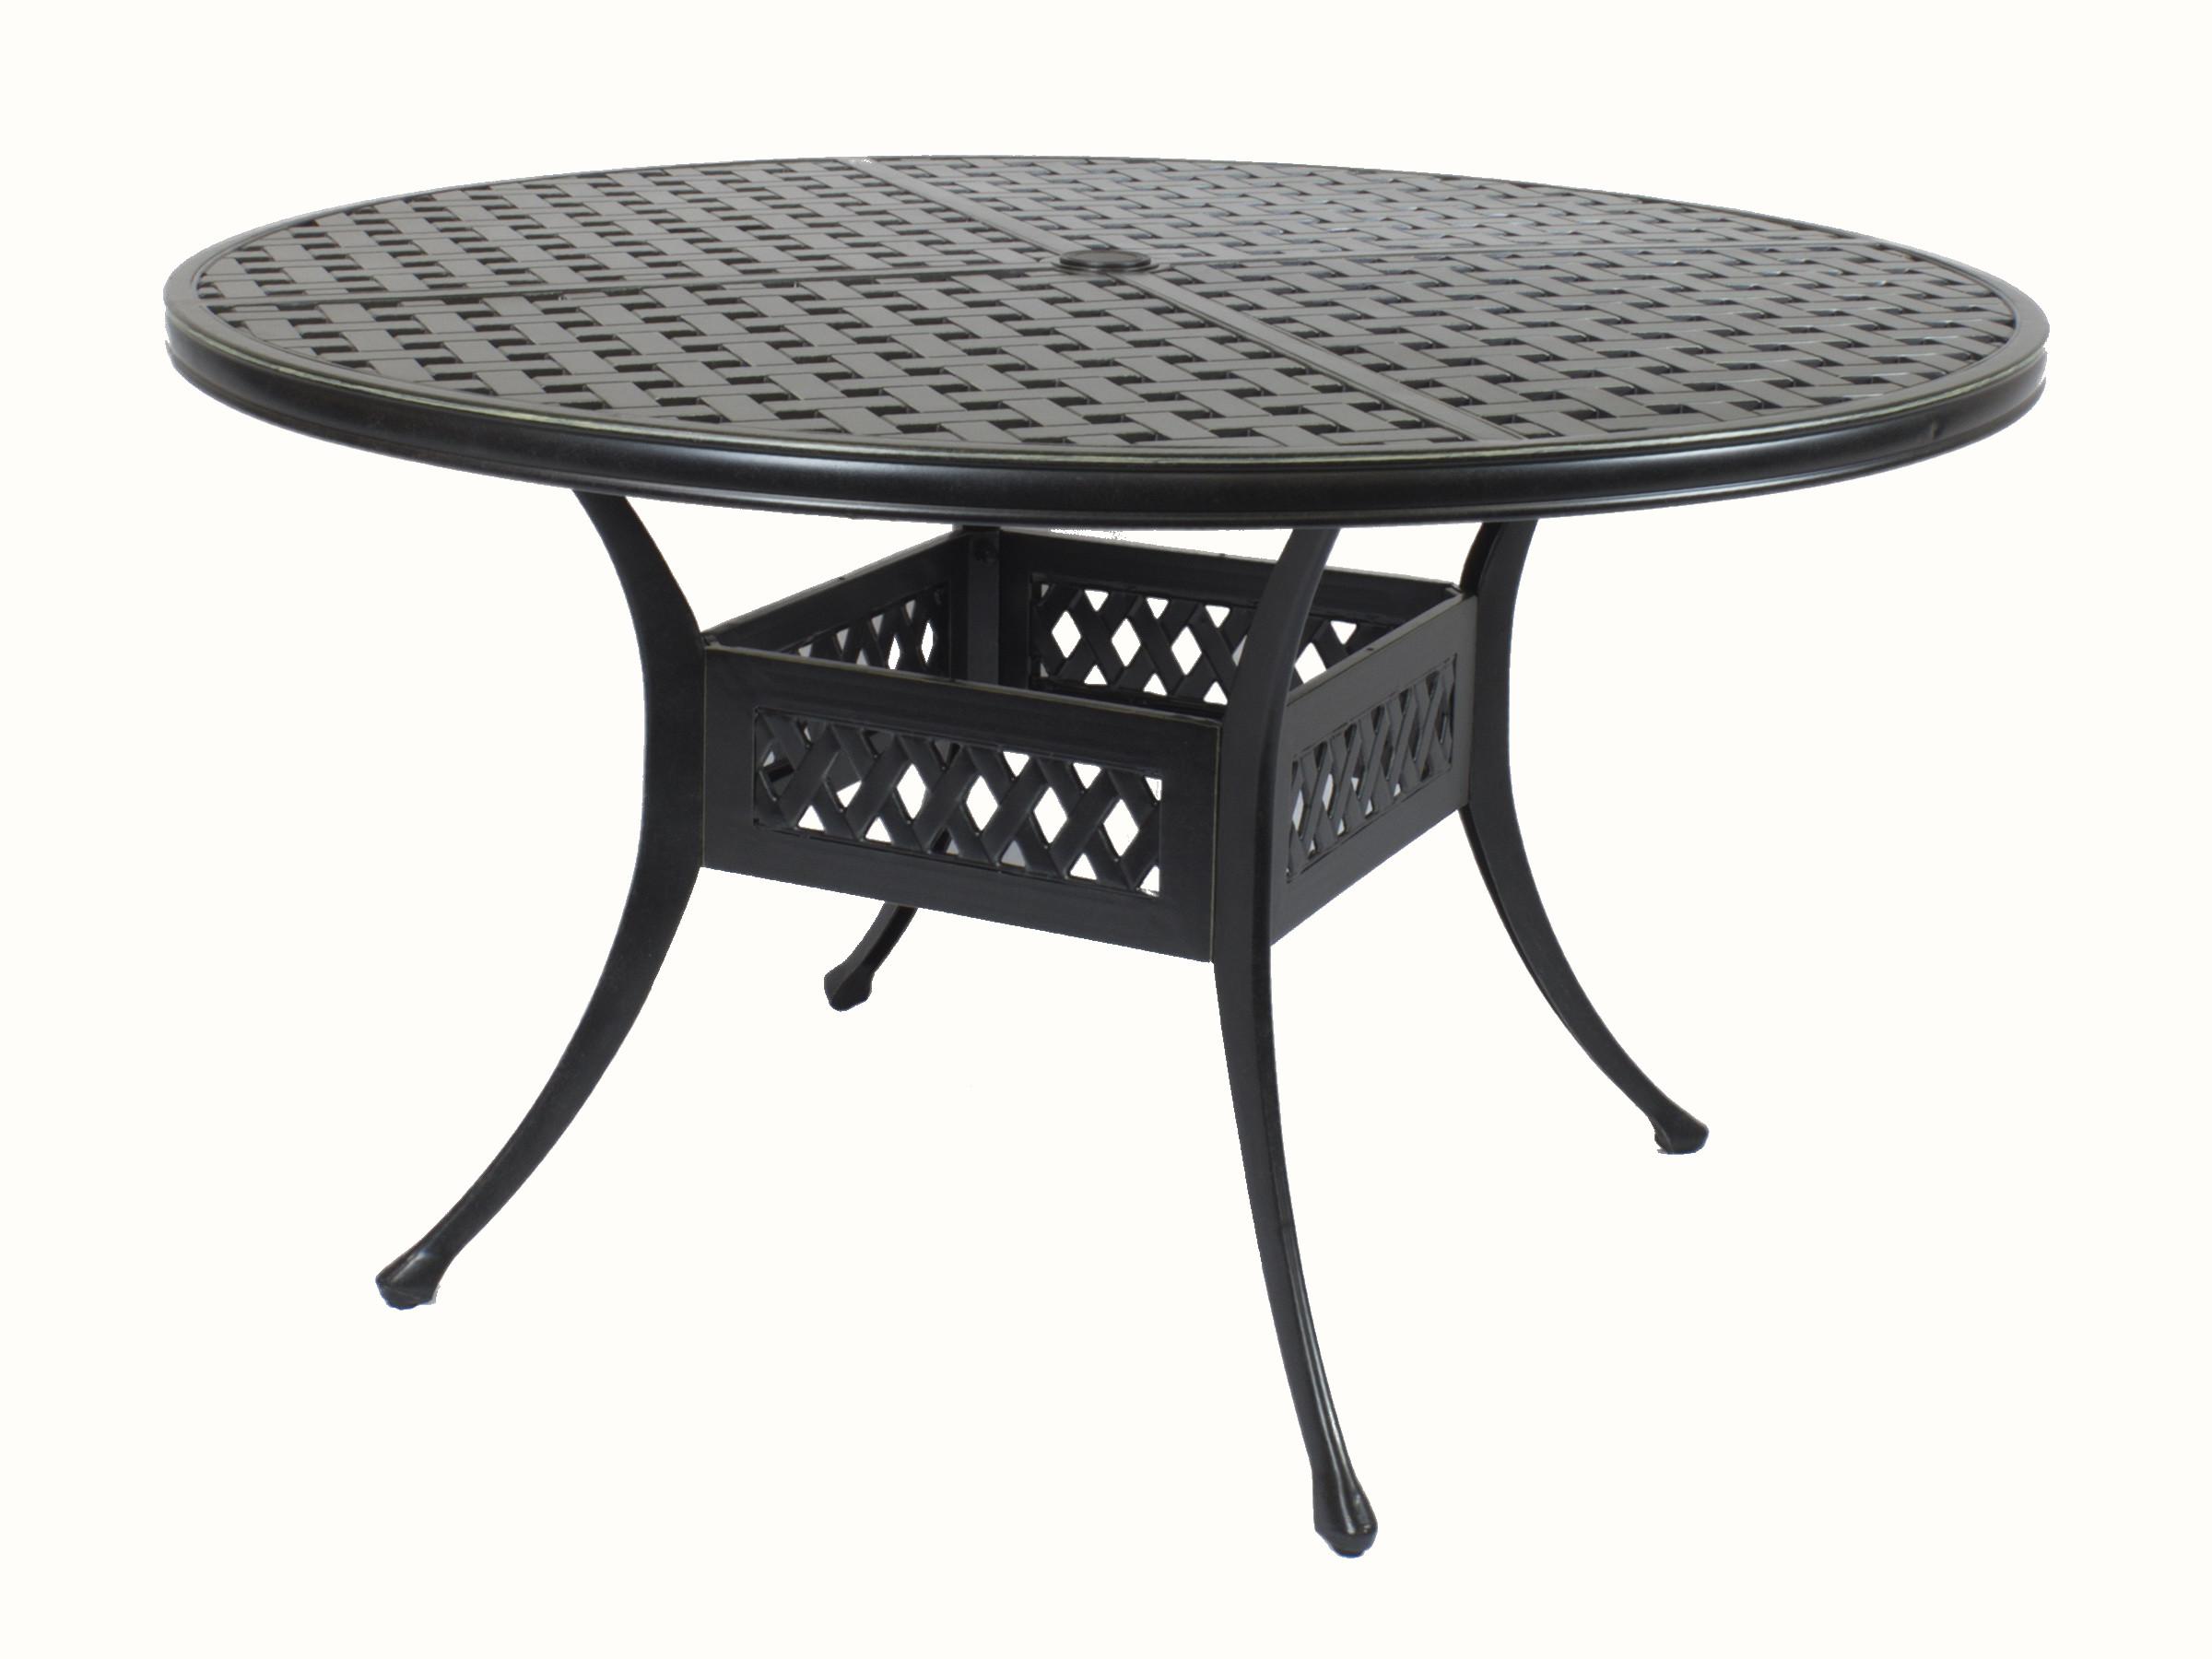 

    
St. Tropez Cast Alumnium Fully Welded Dining Set of 5 by CaliPatio SPECIAL ORDER
